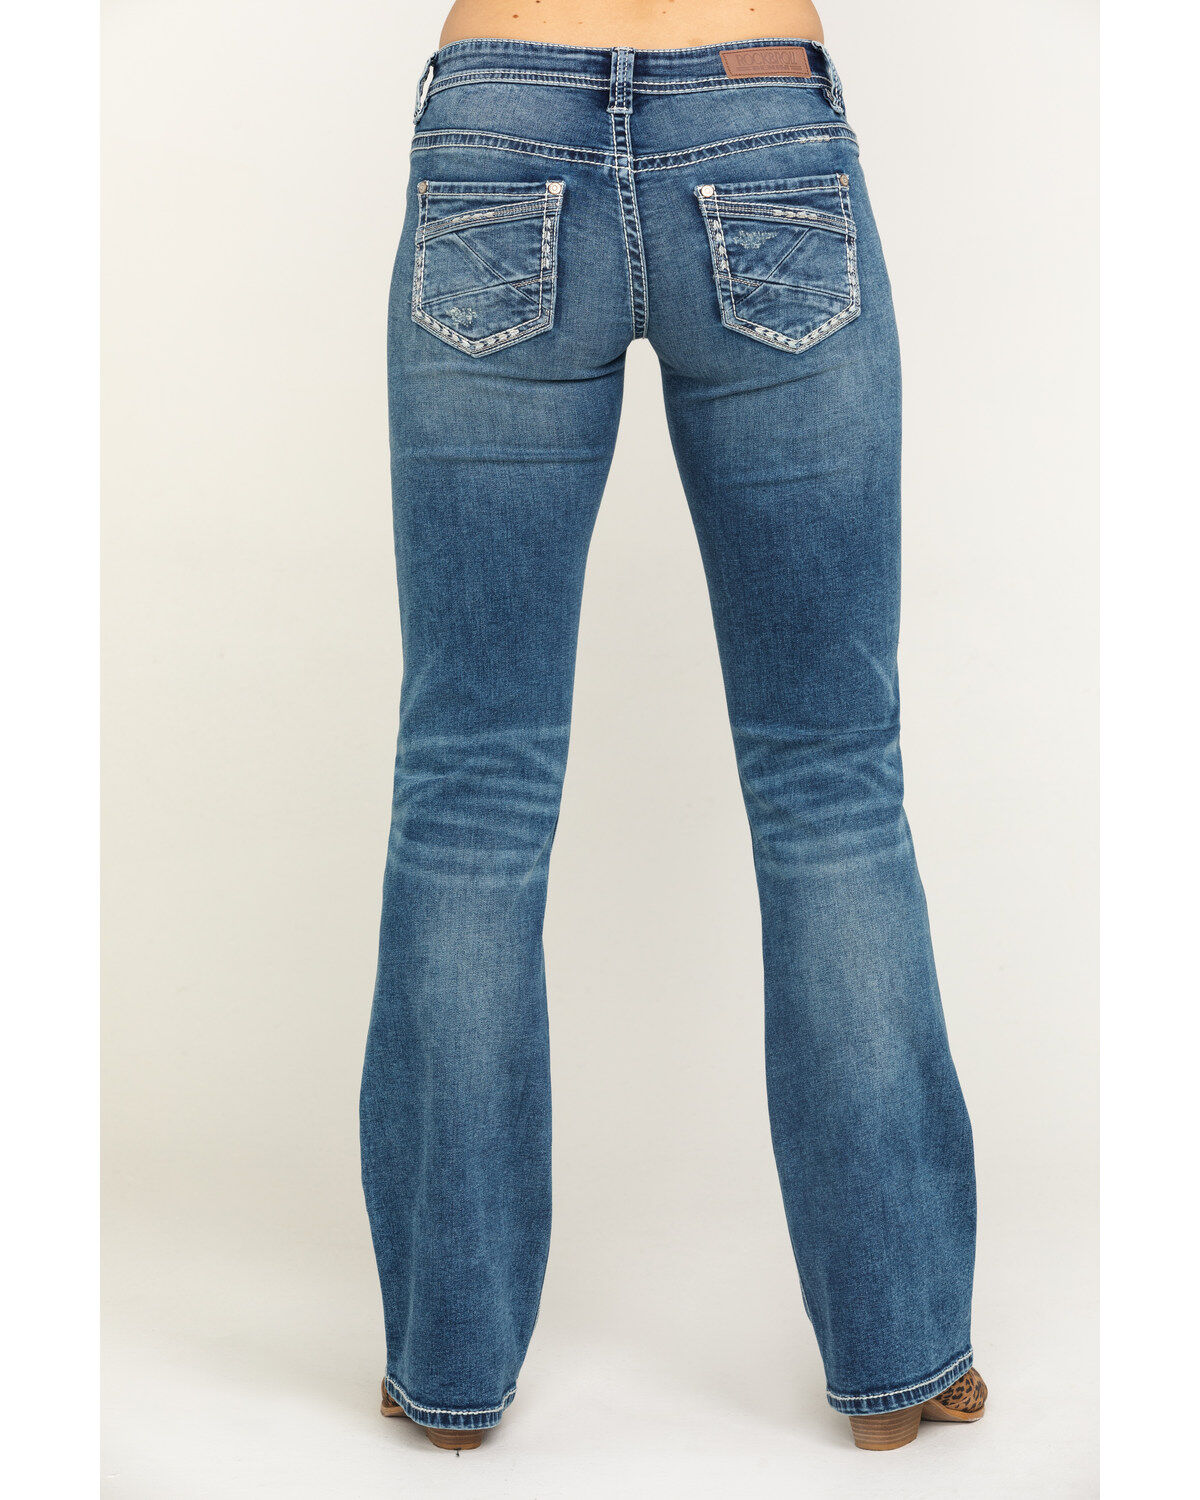 rock and roll riding jeans